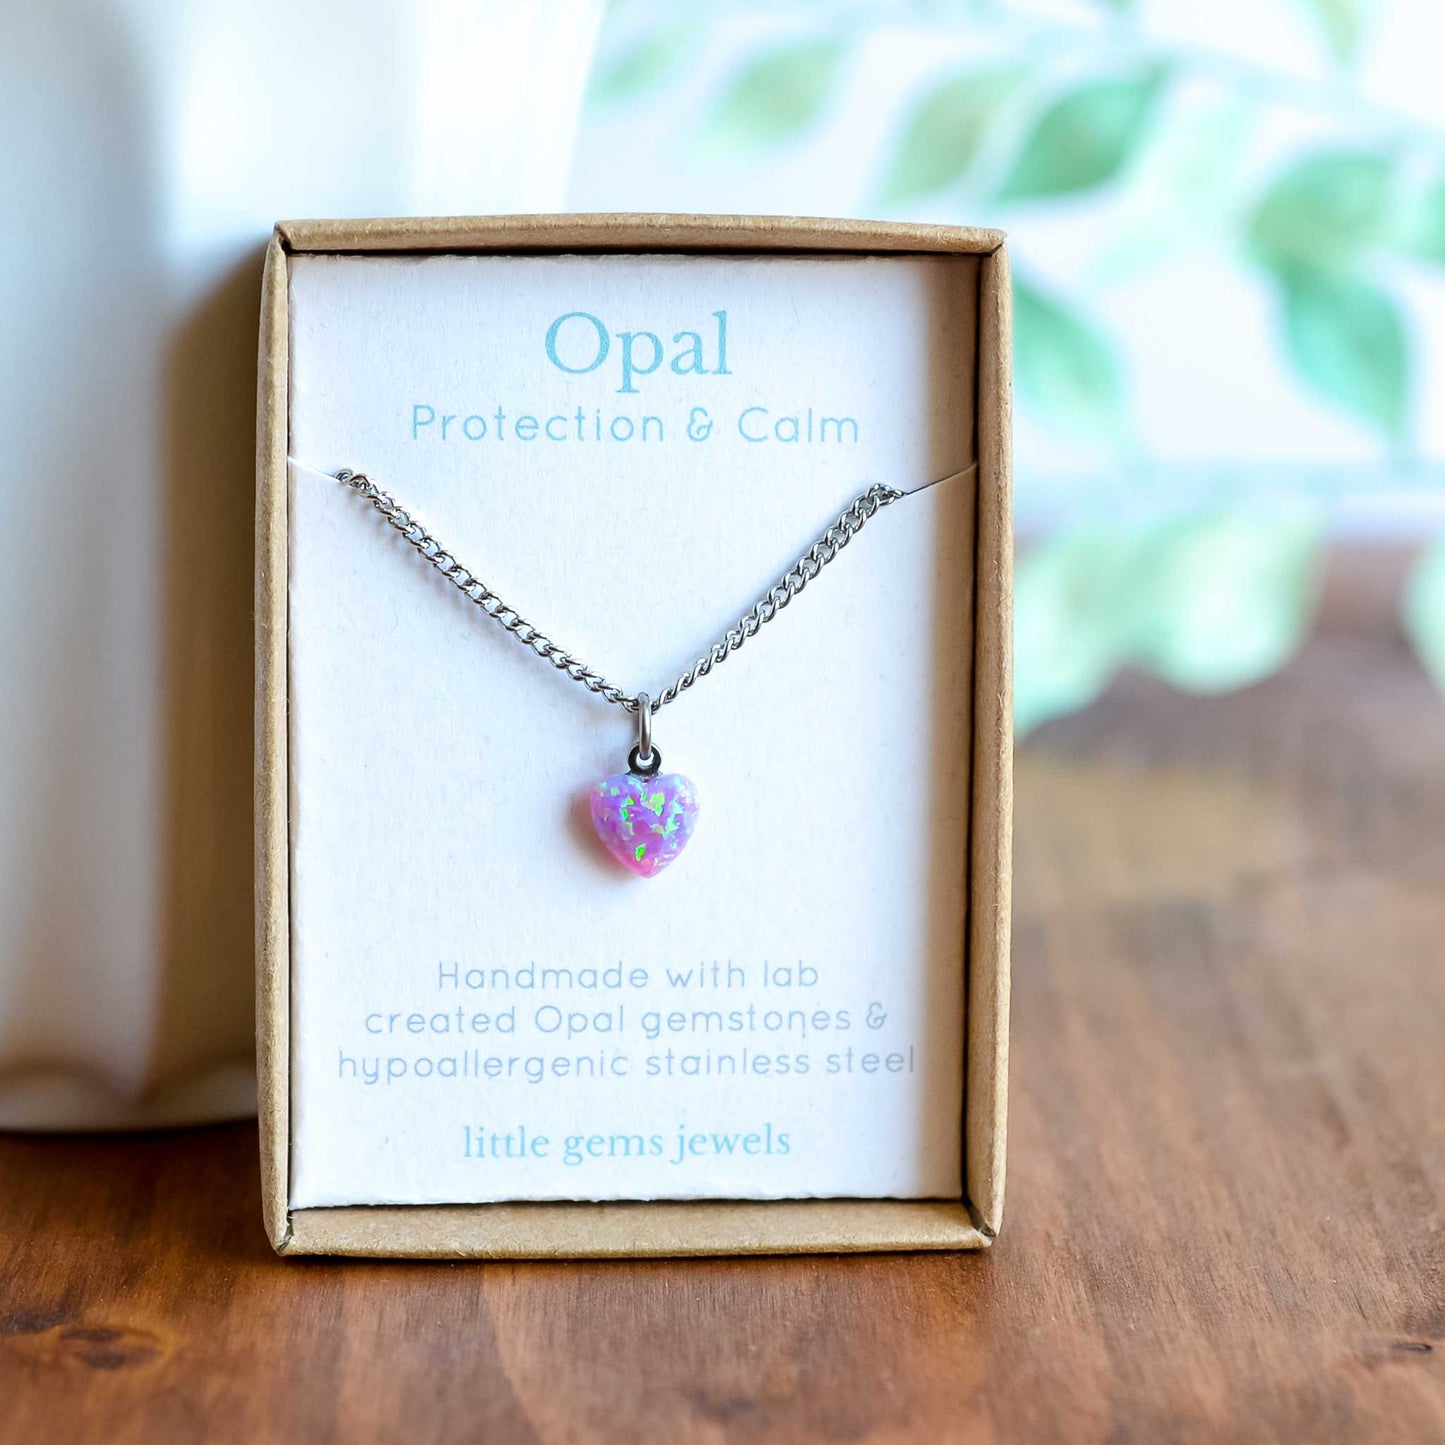 Lab created pink Opal heart necklace in gift box